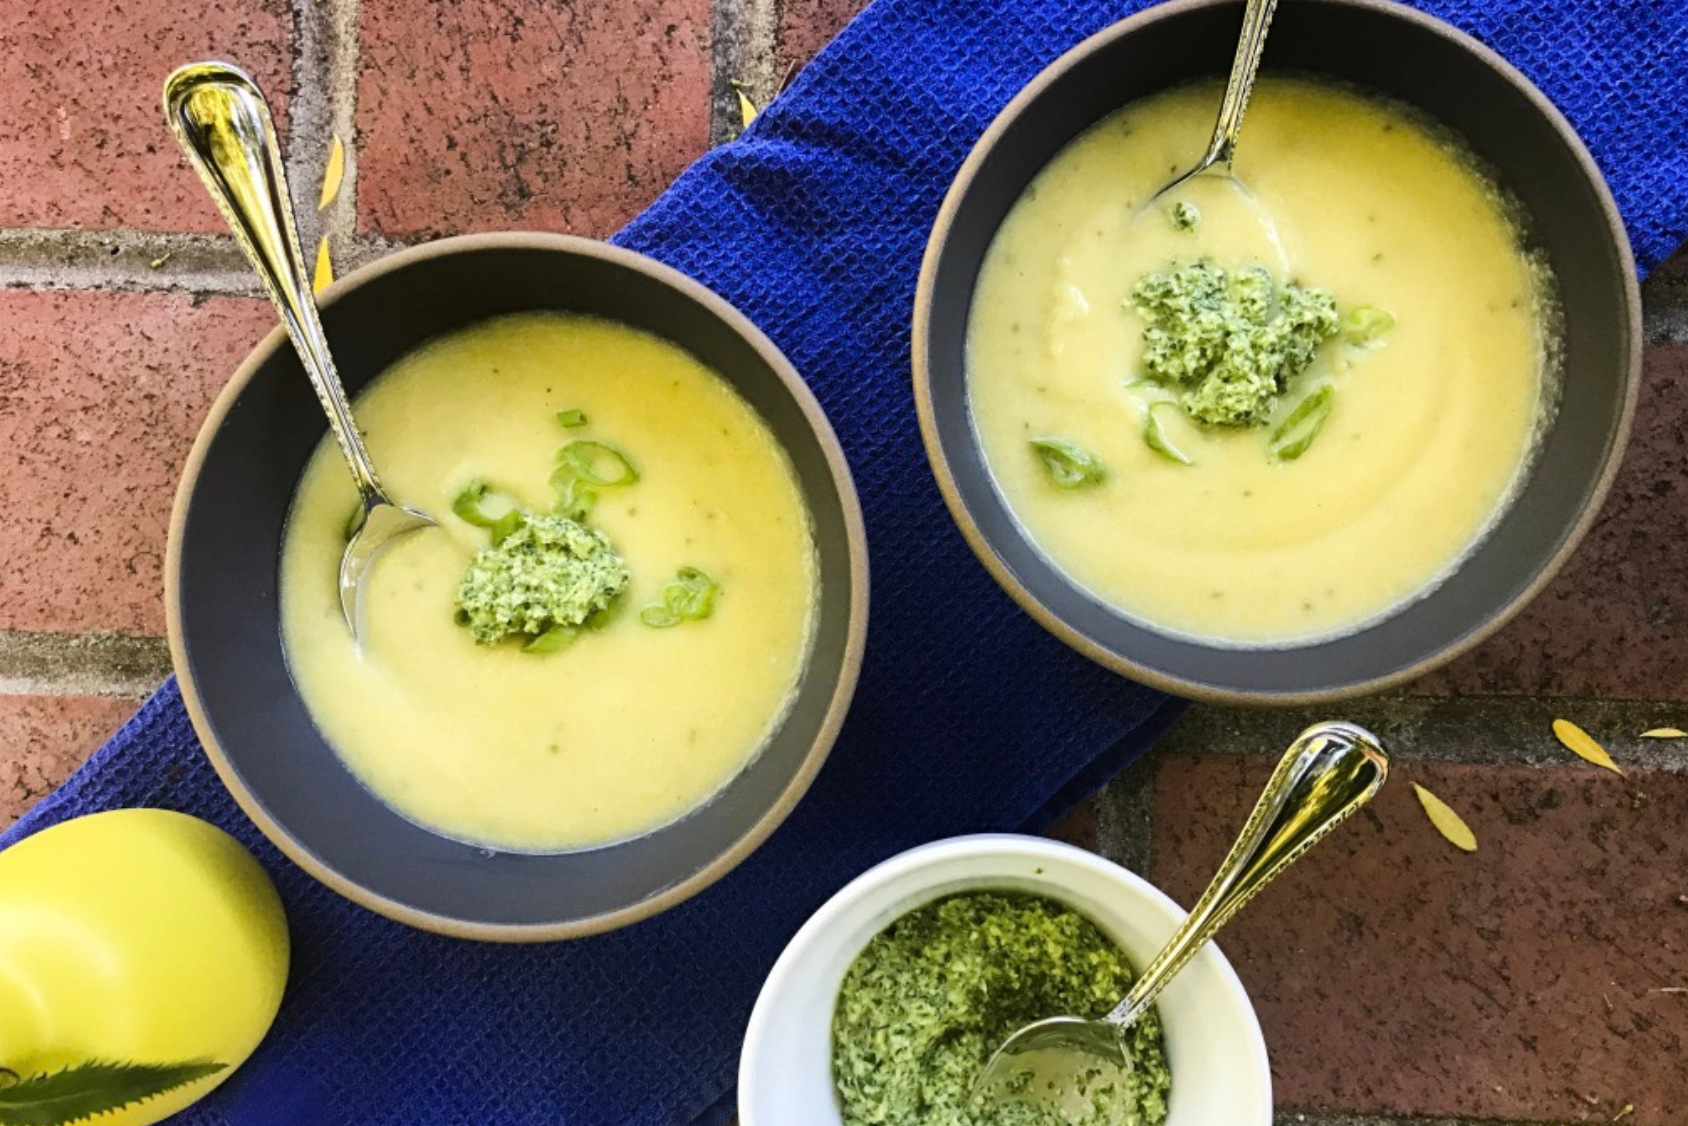 Summer Squash and Leek Soup | Paleo, Whole30, Low-carb | The Real Food Effect by Candace Kennedy, Holistic Nutritionist